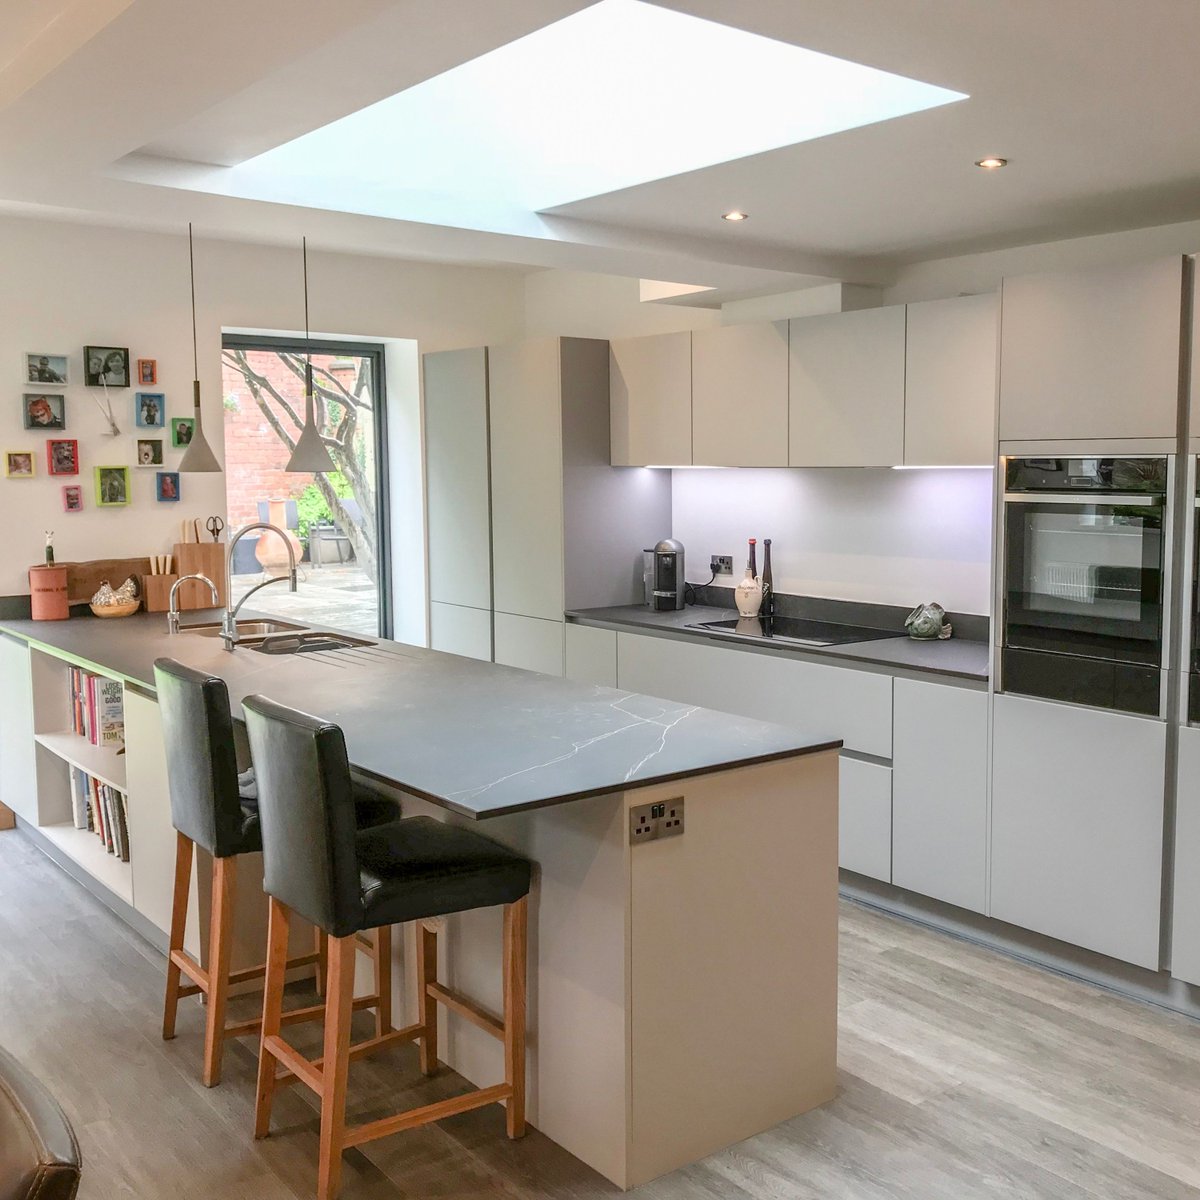 Are you ready to revamp your kitchen space? Get in contact with one of our designers today! ⁠ ⁠ 📸 Sutton Light Grey with Dust Grey⁠ ✏ Ryan Thomas at Sigma 3 Kitchens Swansea⁠ .⁠ #kitchengoals #kitcheninspo #kitchenideas #kitcheninspiration